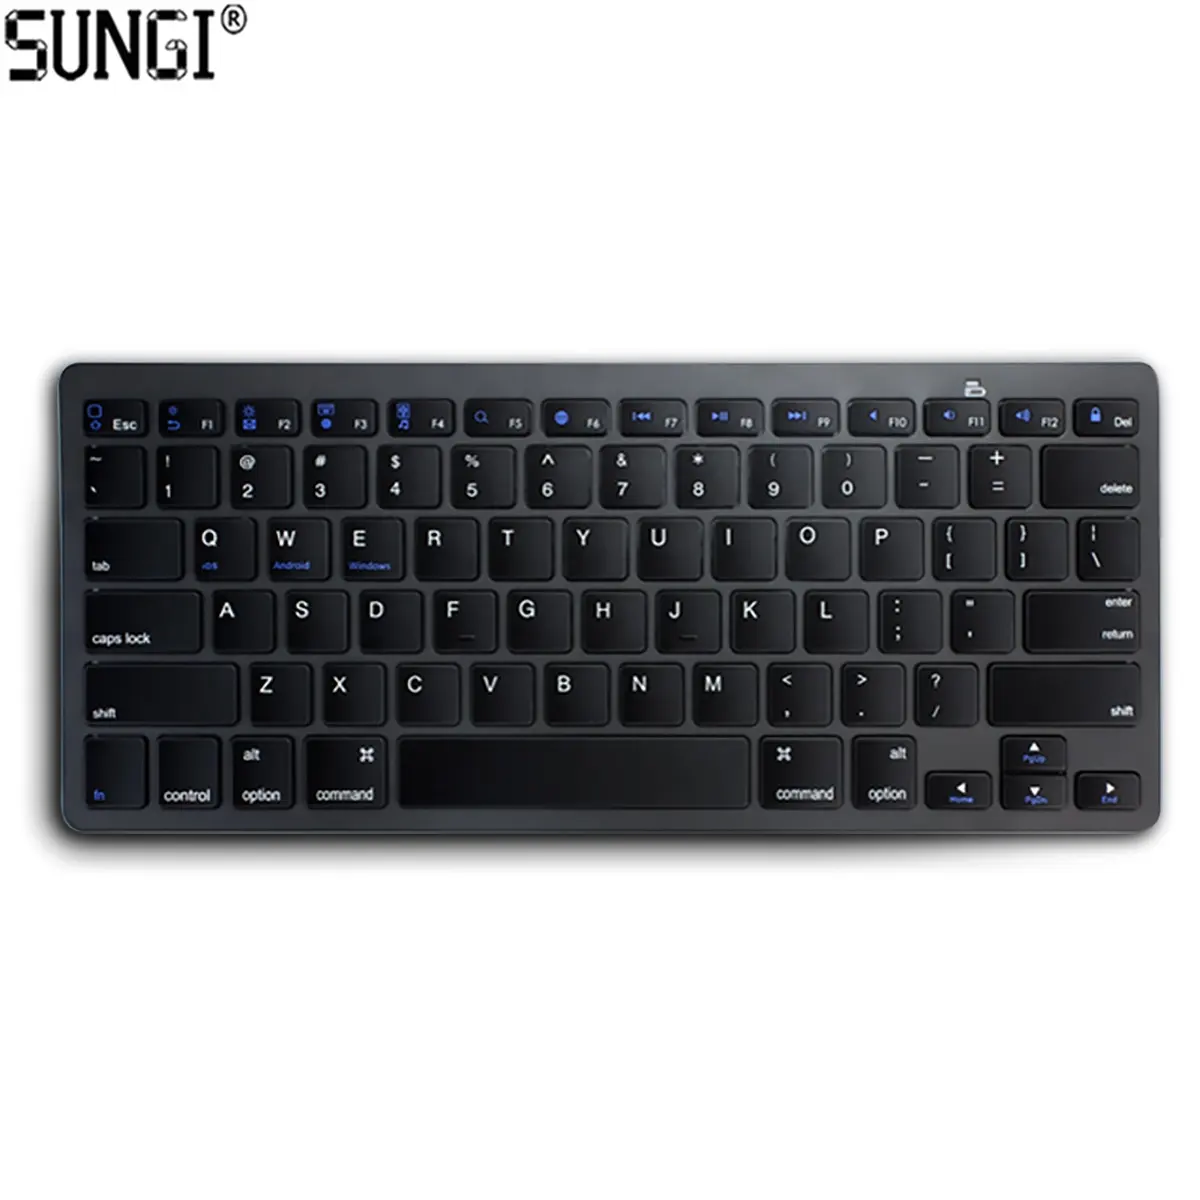 SUNGI Blue tooth Keyboard BT Wireless Keyboard for for iOS iPad Air/Pro/iPad Mini Android MacOS Windows Tablets PC Phone